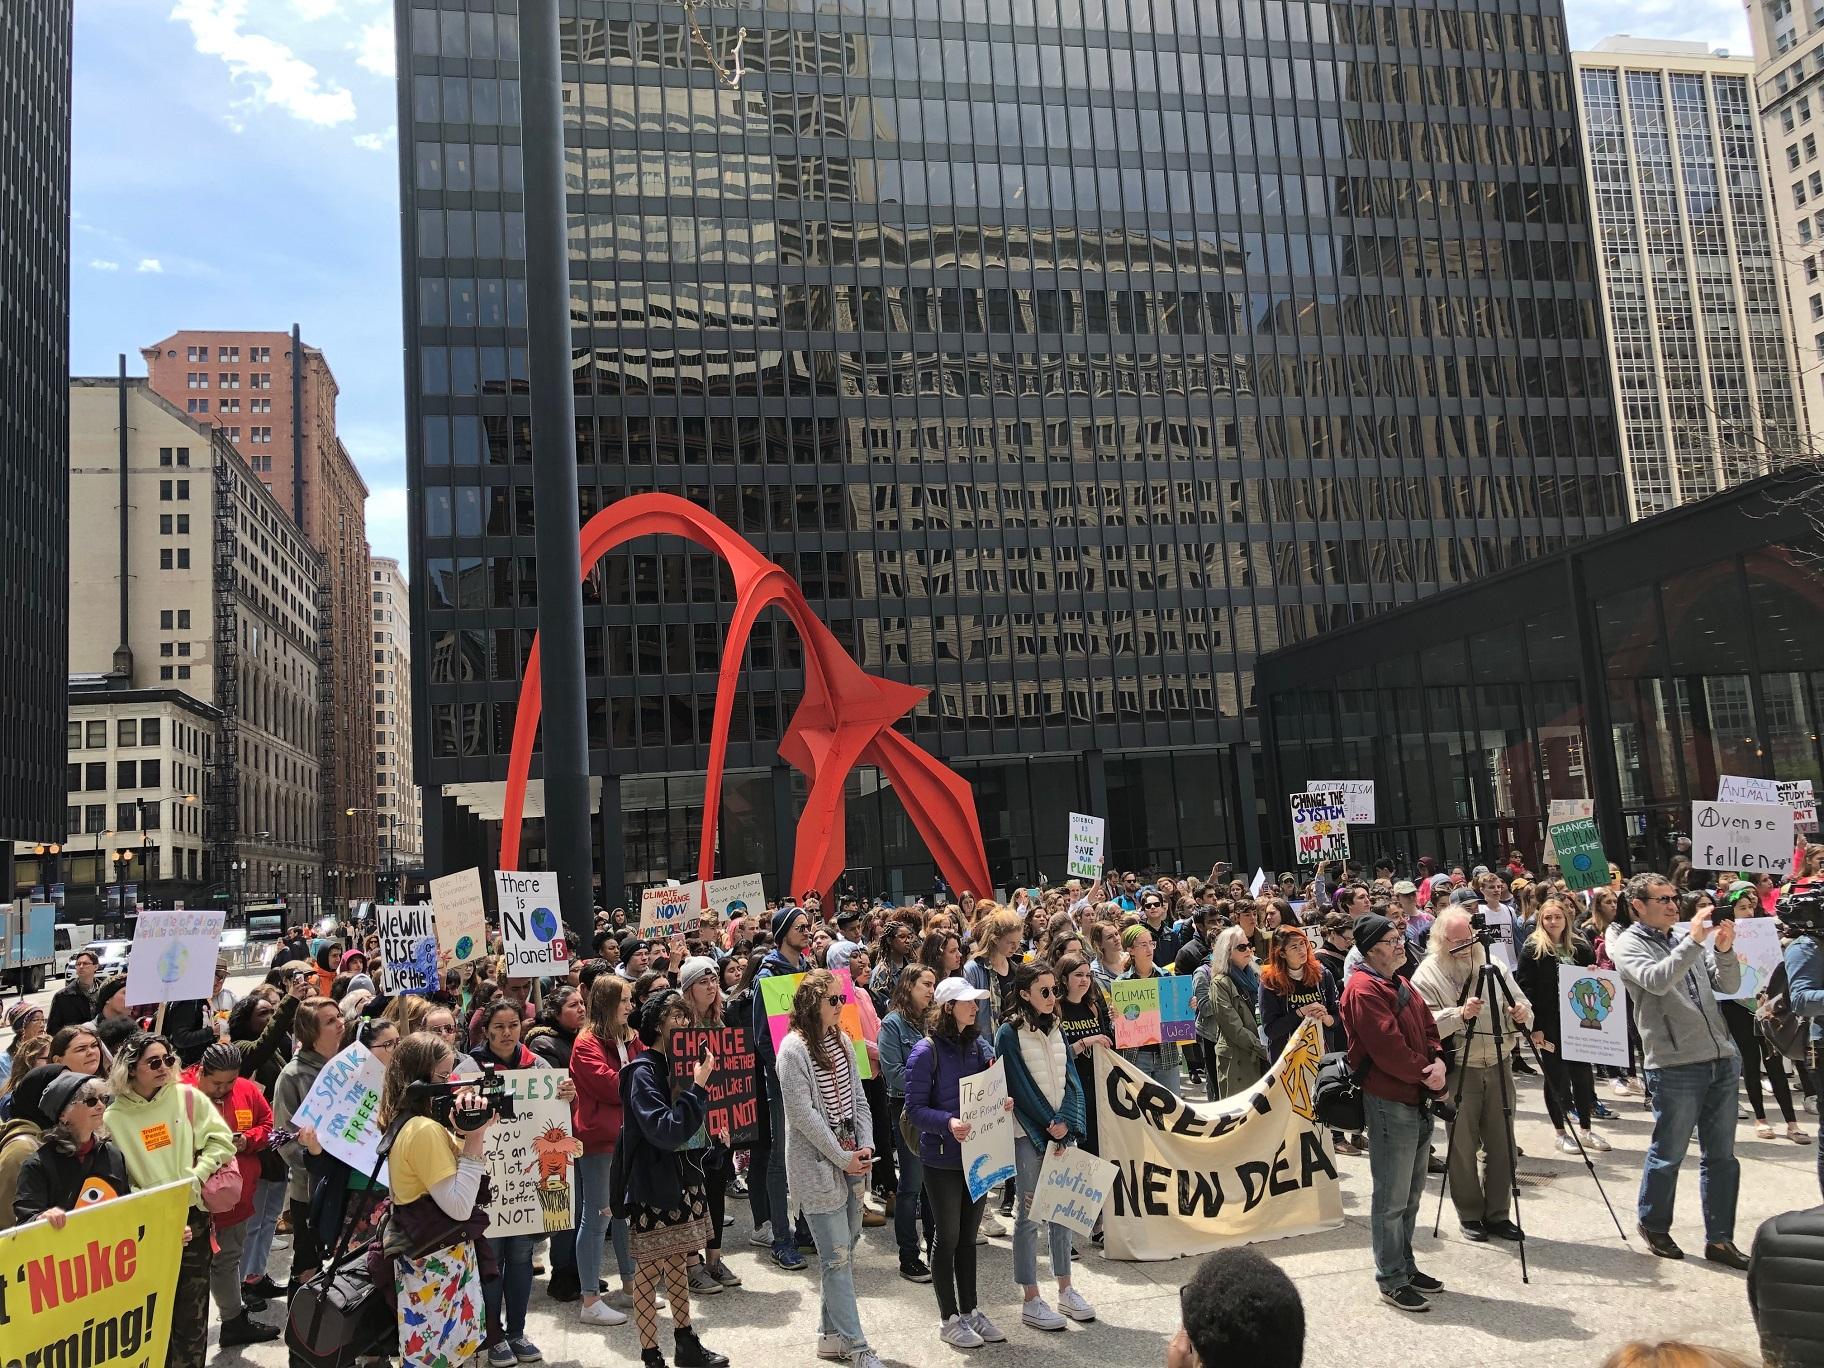 Chicago-area students rallied at Federal Plaza in downtown Chicago as part of the Youth Climate Strike, a global movement aimed at tackling climate change. (Alex Ruppenthal / WTTW News)